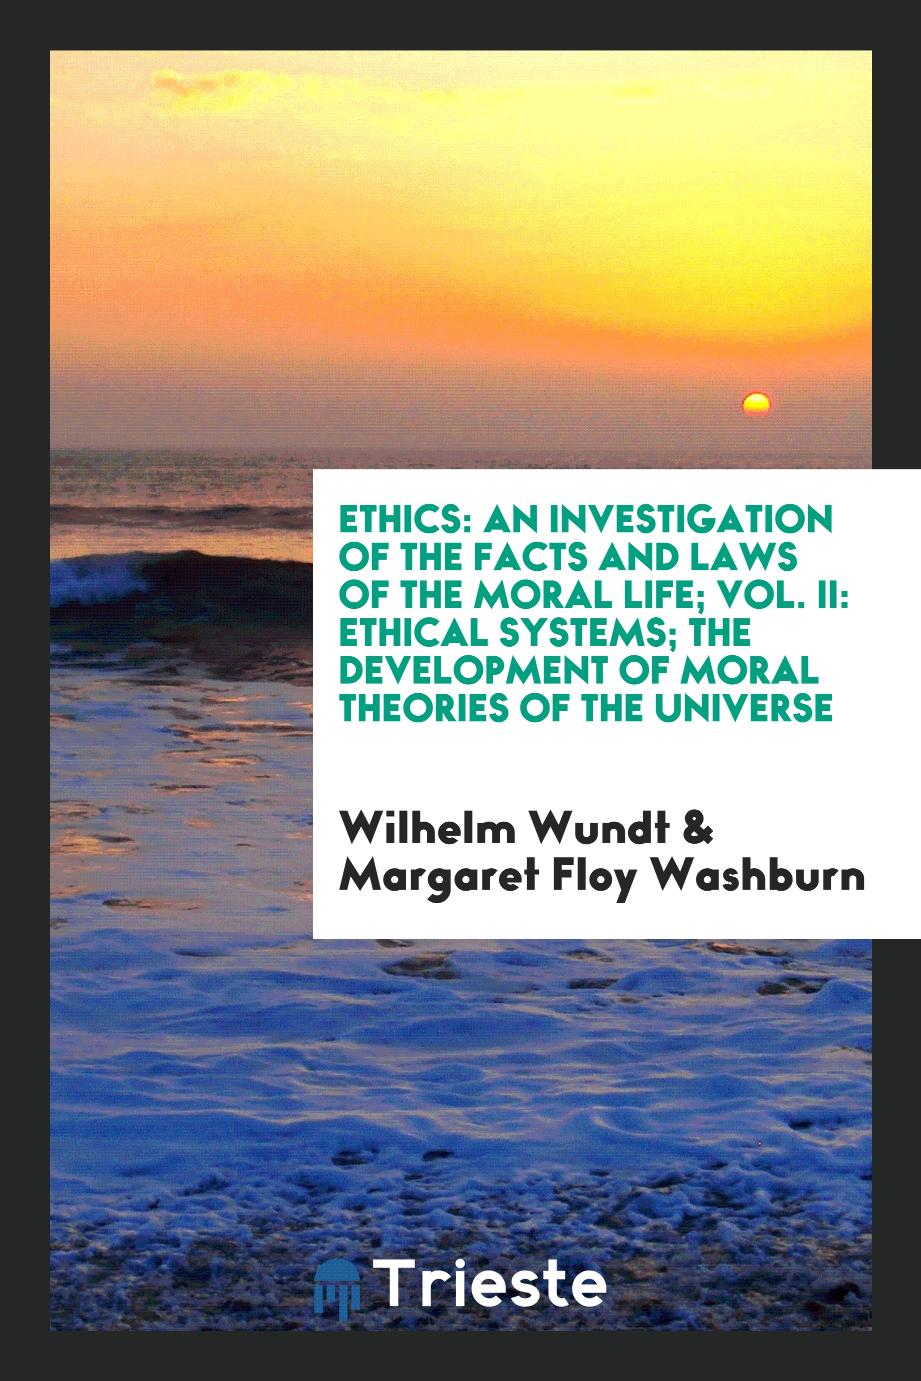 Ethics: An Investigation of the Facts and Laws of the Moral Life; Vol. II: Ethical Systems; The Development of Moral Theories of the Universe